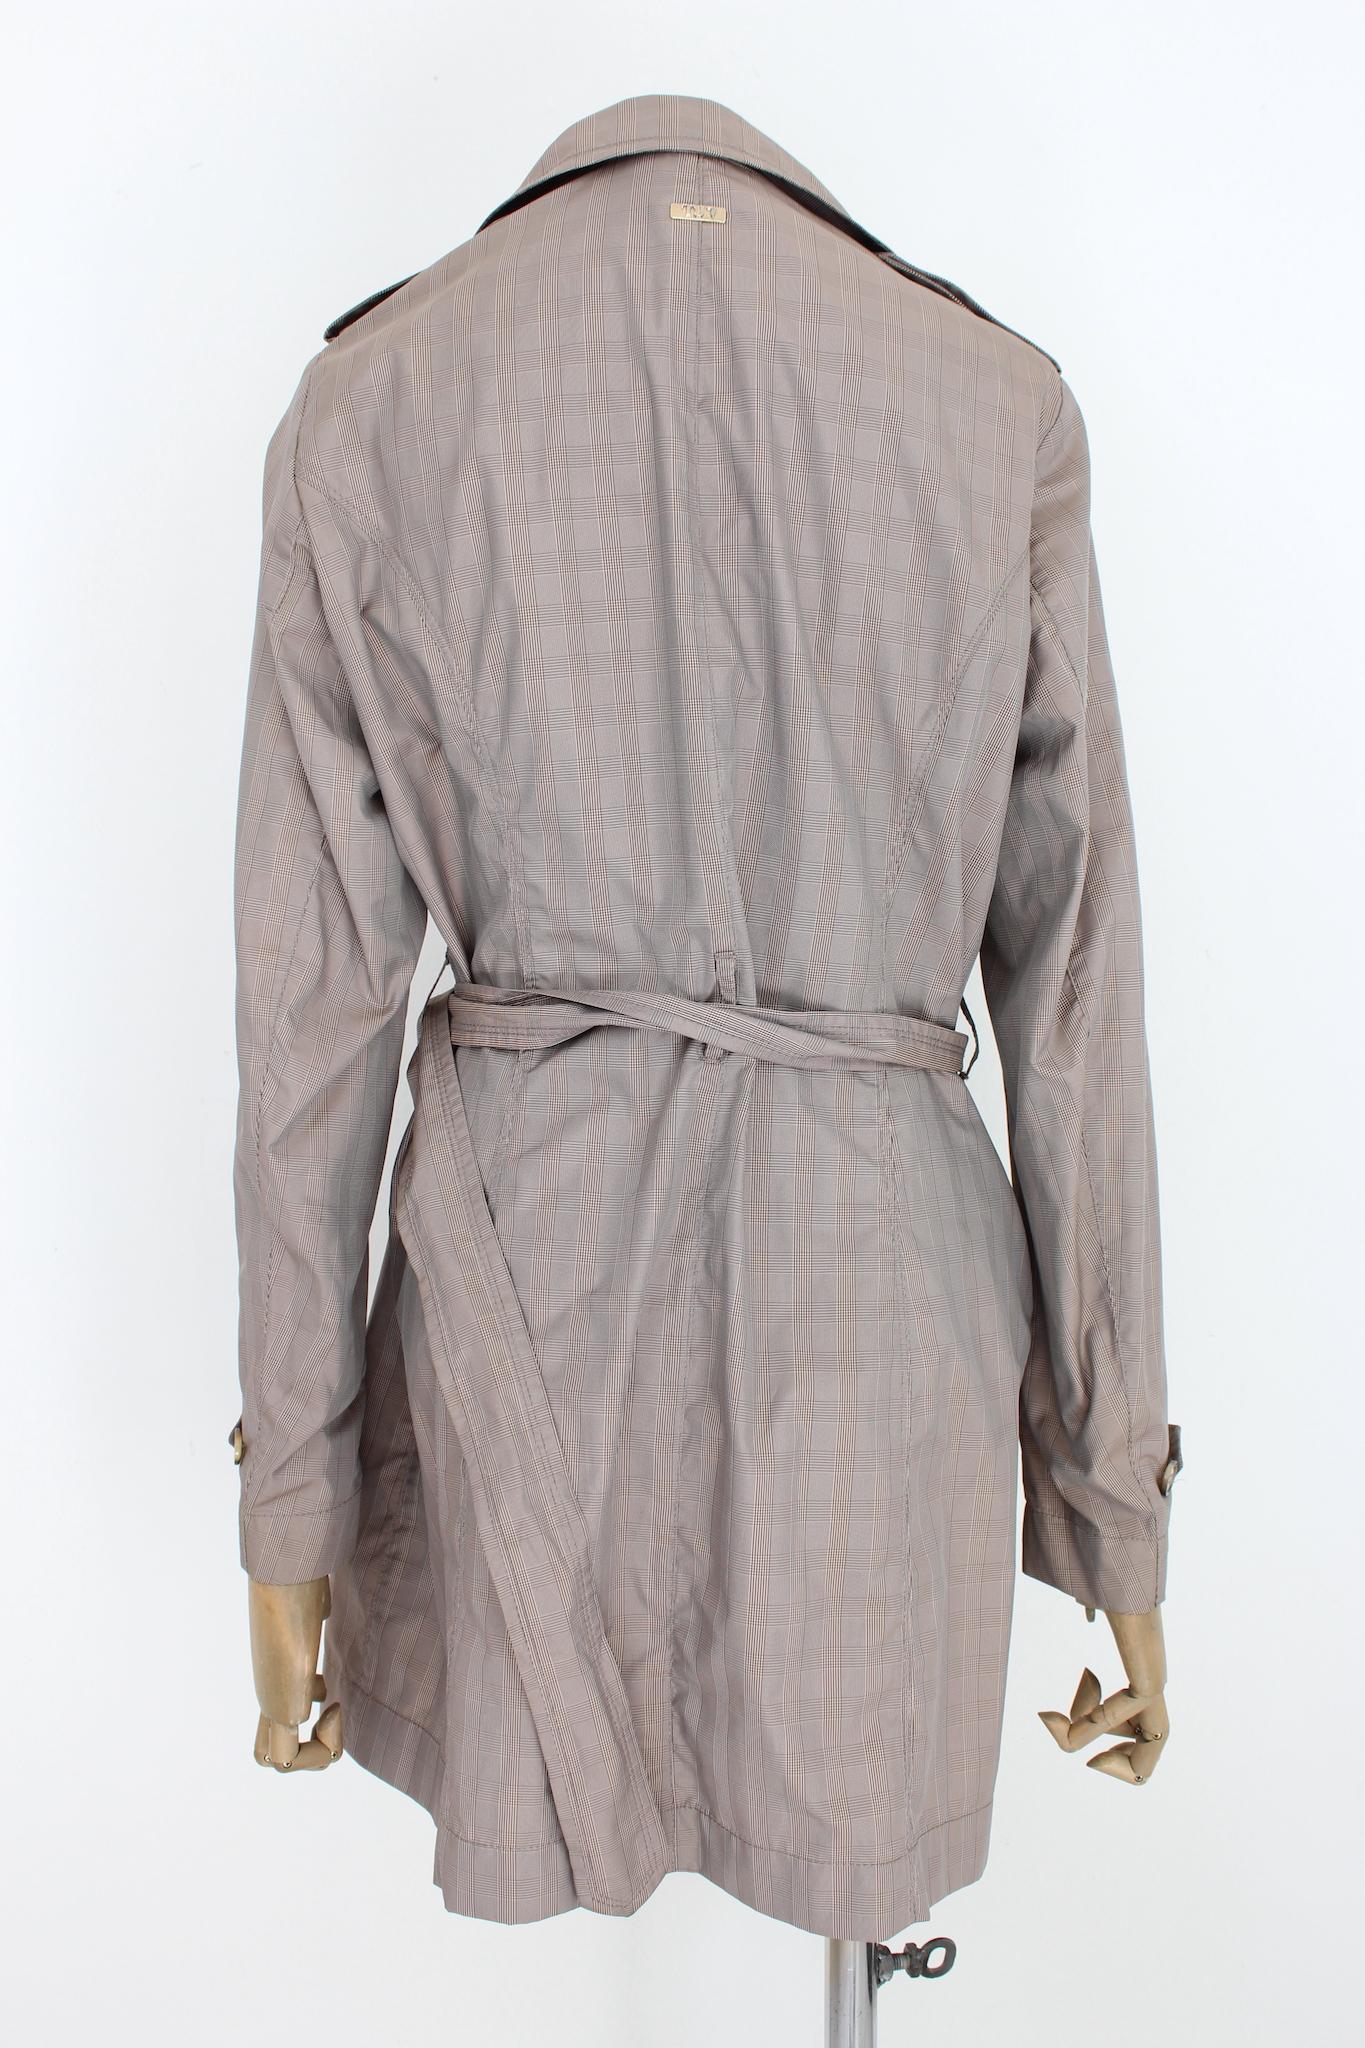 Trussardi 2000s trench coat. Beige and brown checked pattern, double-breasted closure with adjustable belt at the waist. 100% polyester fabric, internally unlined. Made in Italy

Size: 46 It 12 Us 14 Uk

Shoulder: 46 cm
Bust / Chest: 55